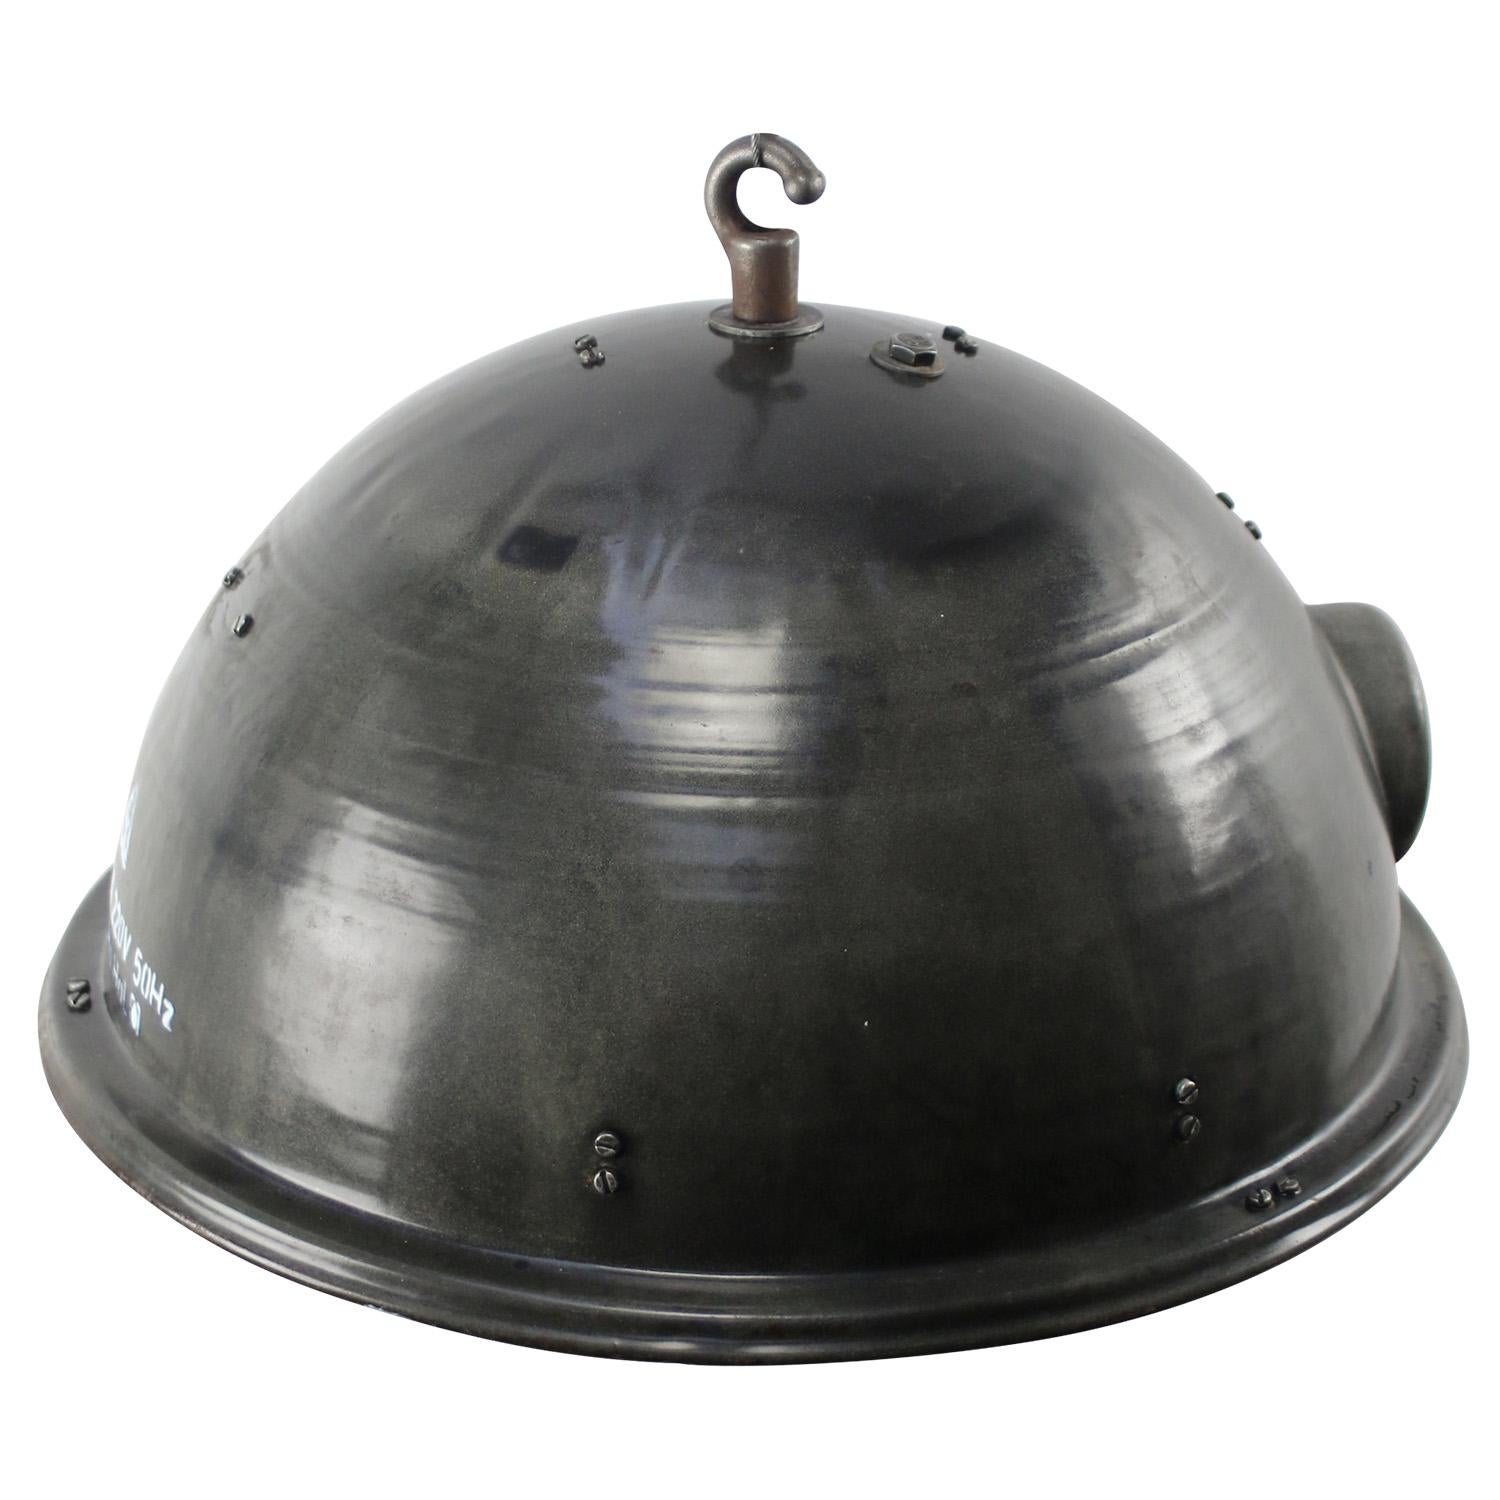 Factory pendant. Black / Dark gray enamel white interior. Cast iron hook.

Weight: 5.50 kg / 12.1 lb

Priced per individual item. All lamps have been made suitable by international standards for incandescent light bulbs, energy-efficient and LED